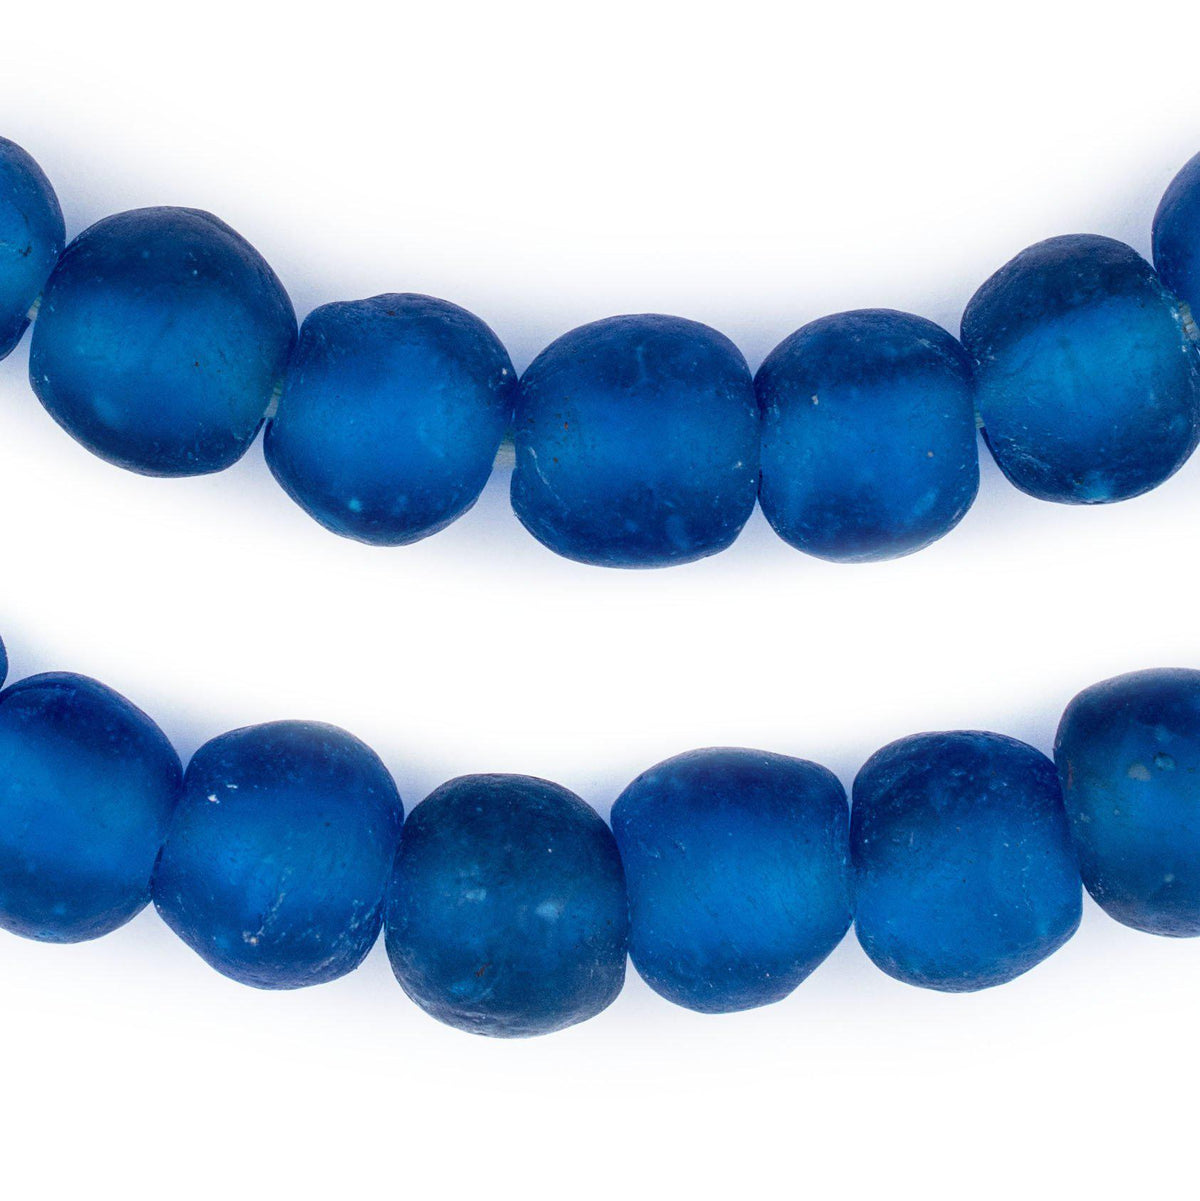 Azul Recycled Glass Beads - Shop for Beads at The Bead Chest